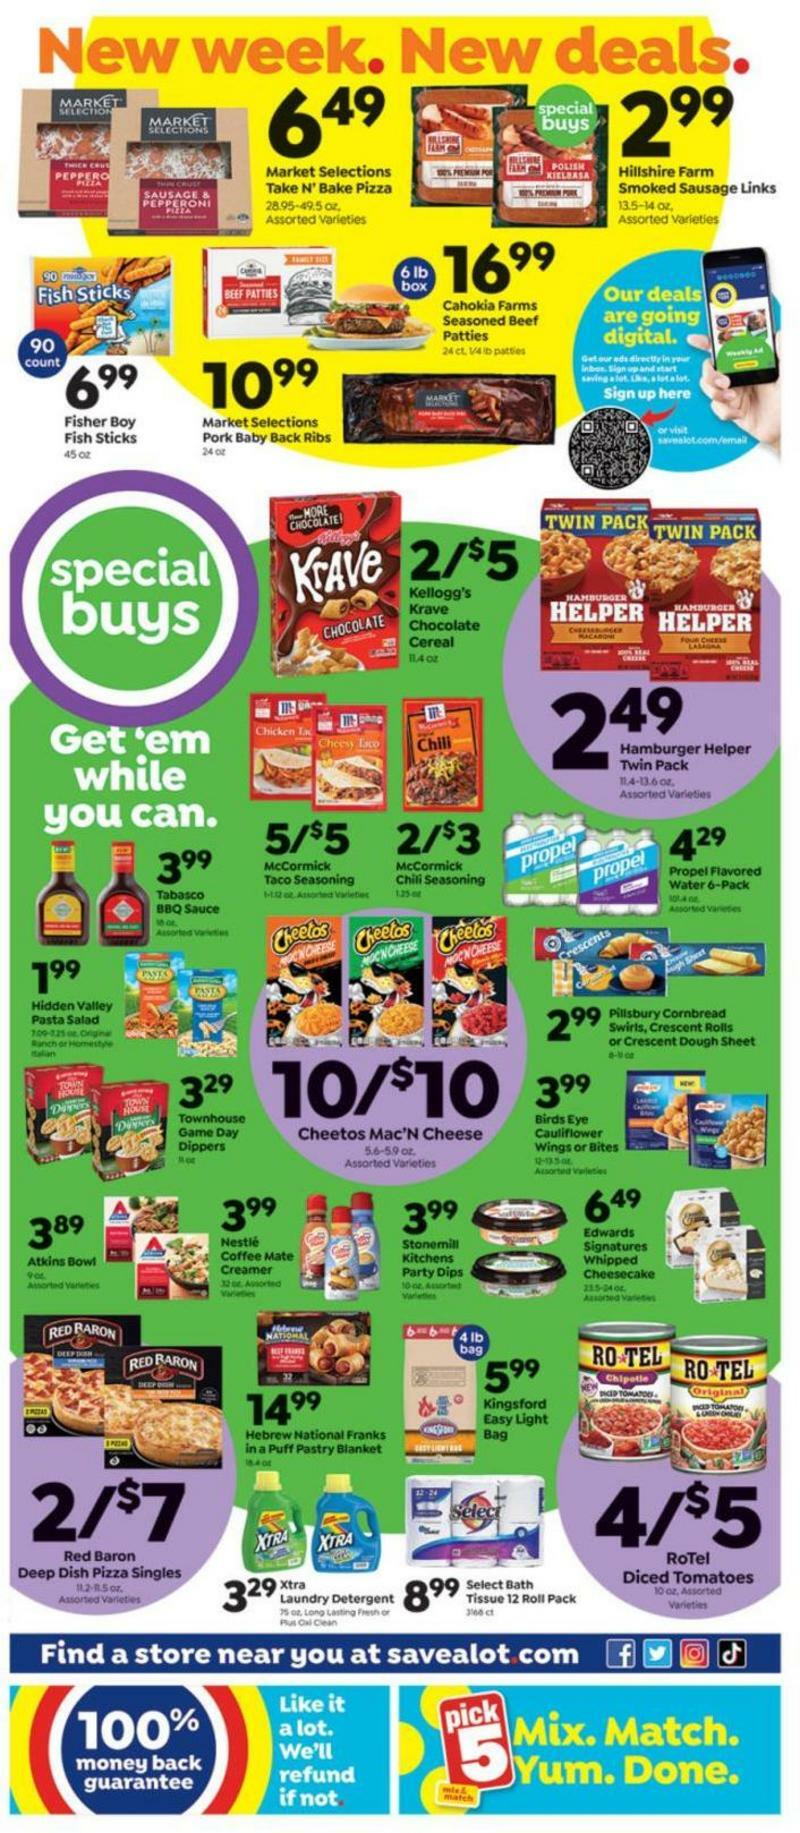 Save A Lot Weekly Ad from September 7